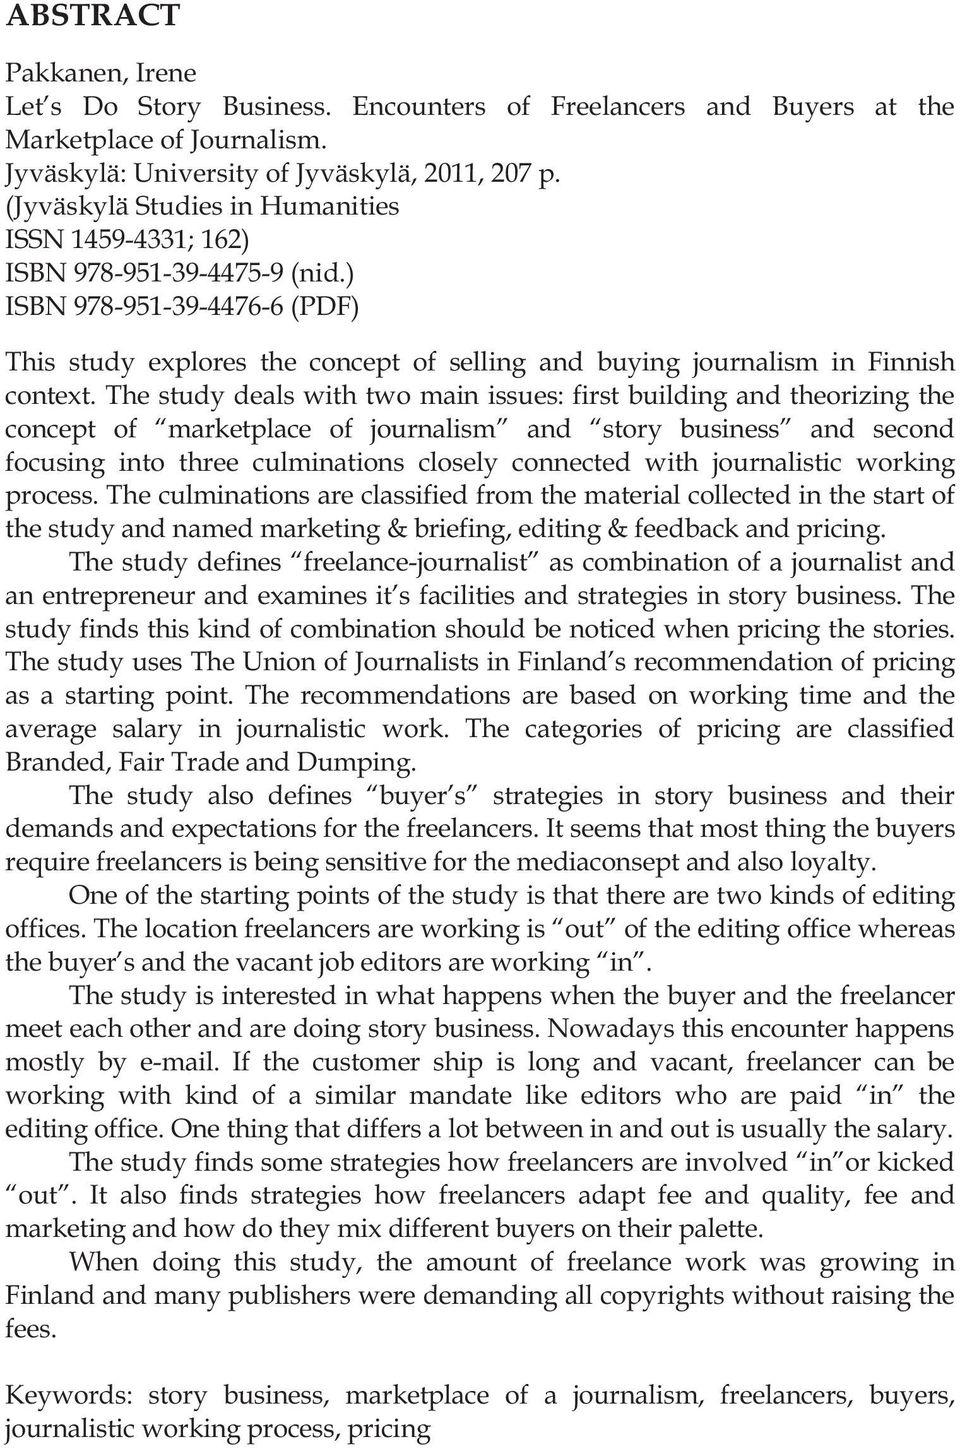 The study deals with two main issues: first building and theorizing the concept of marketplace of journalism and story business and second focusing into three culminations closely connected with